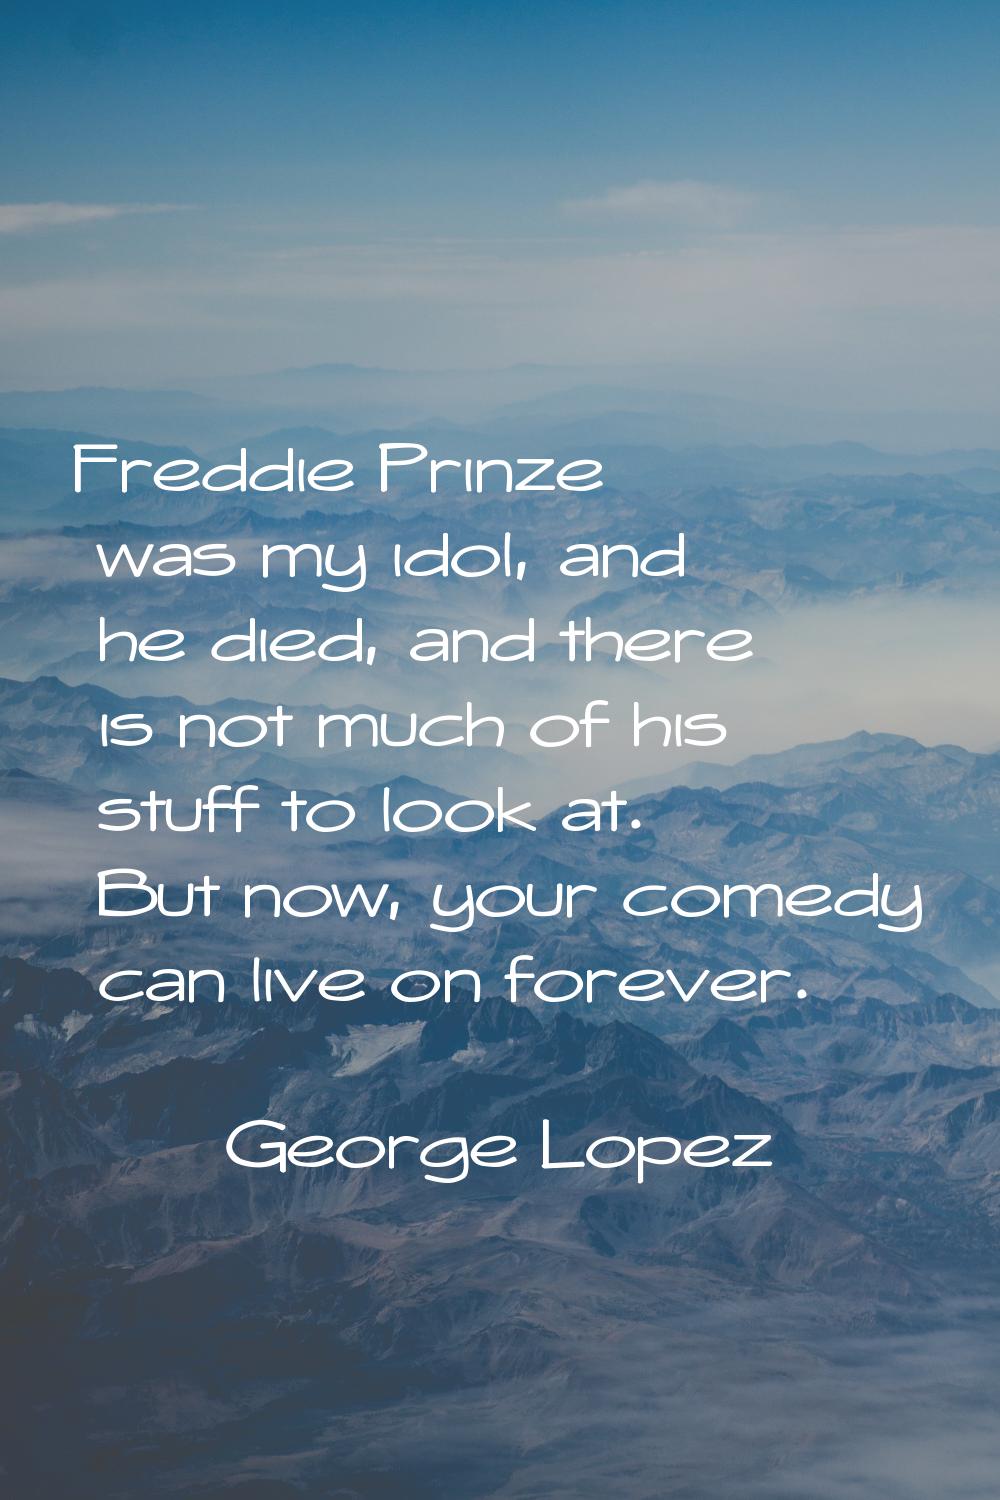 Freddie Prinze was my idol, and he died, and there is not much of his stuff to look at. But now, yo